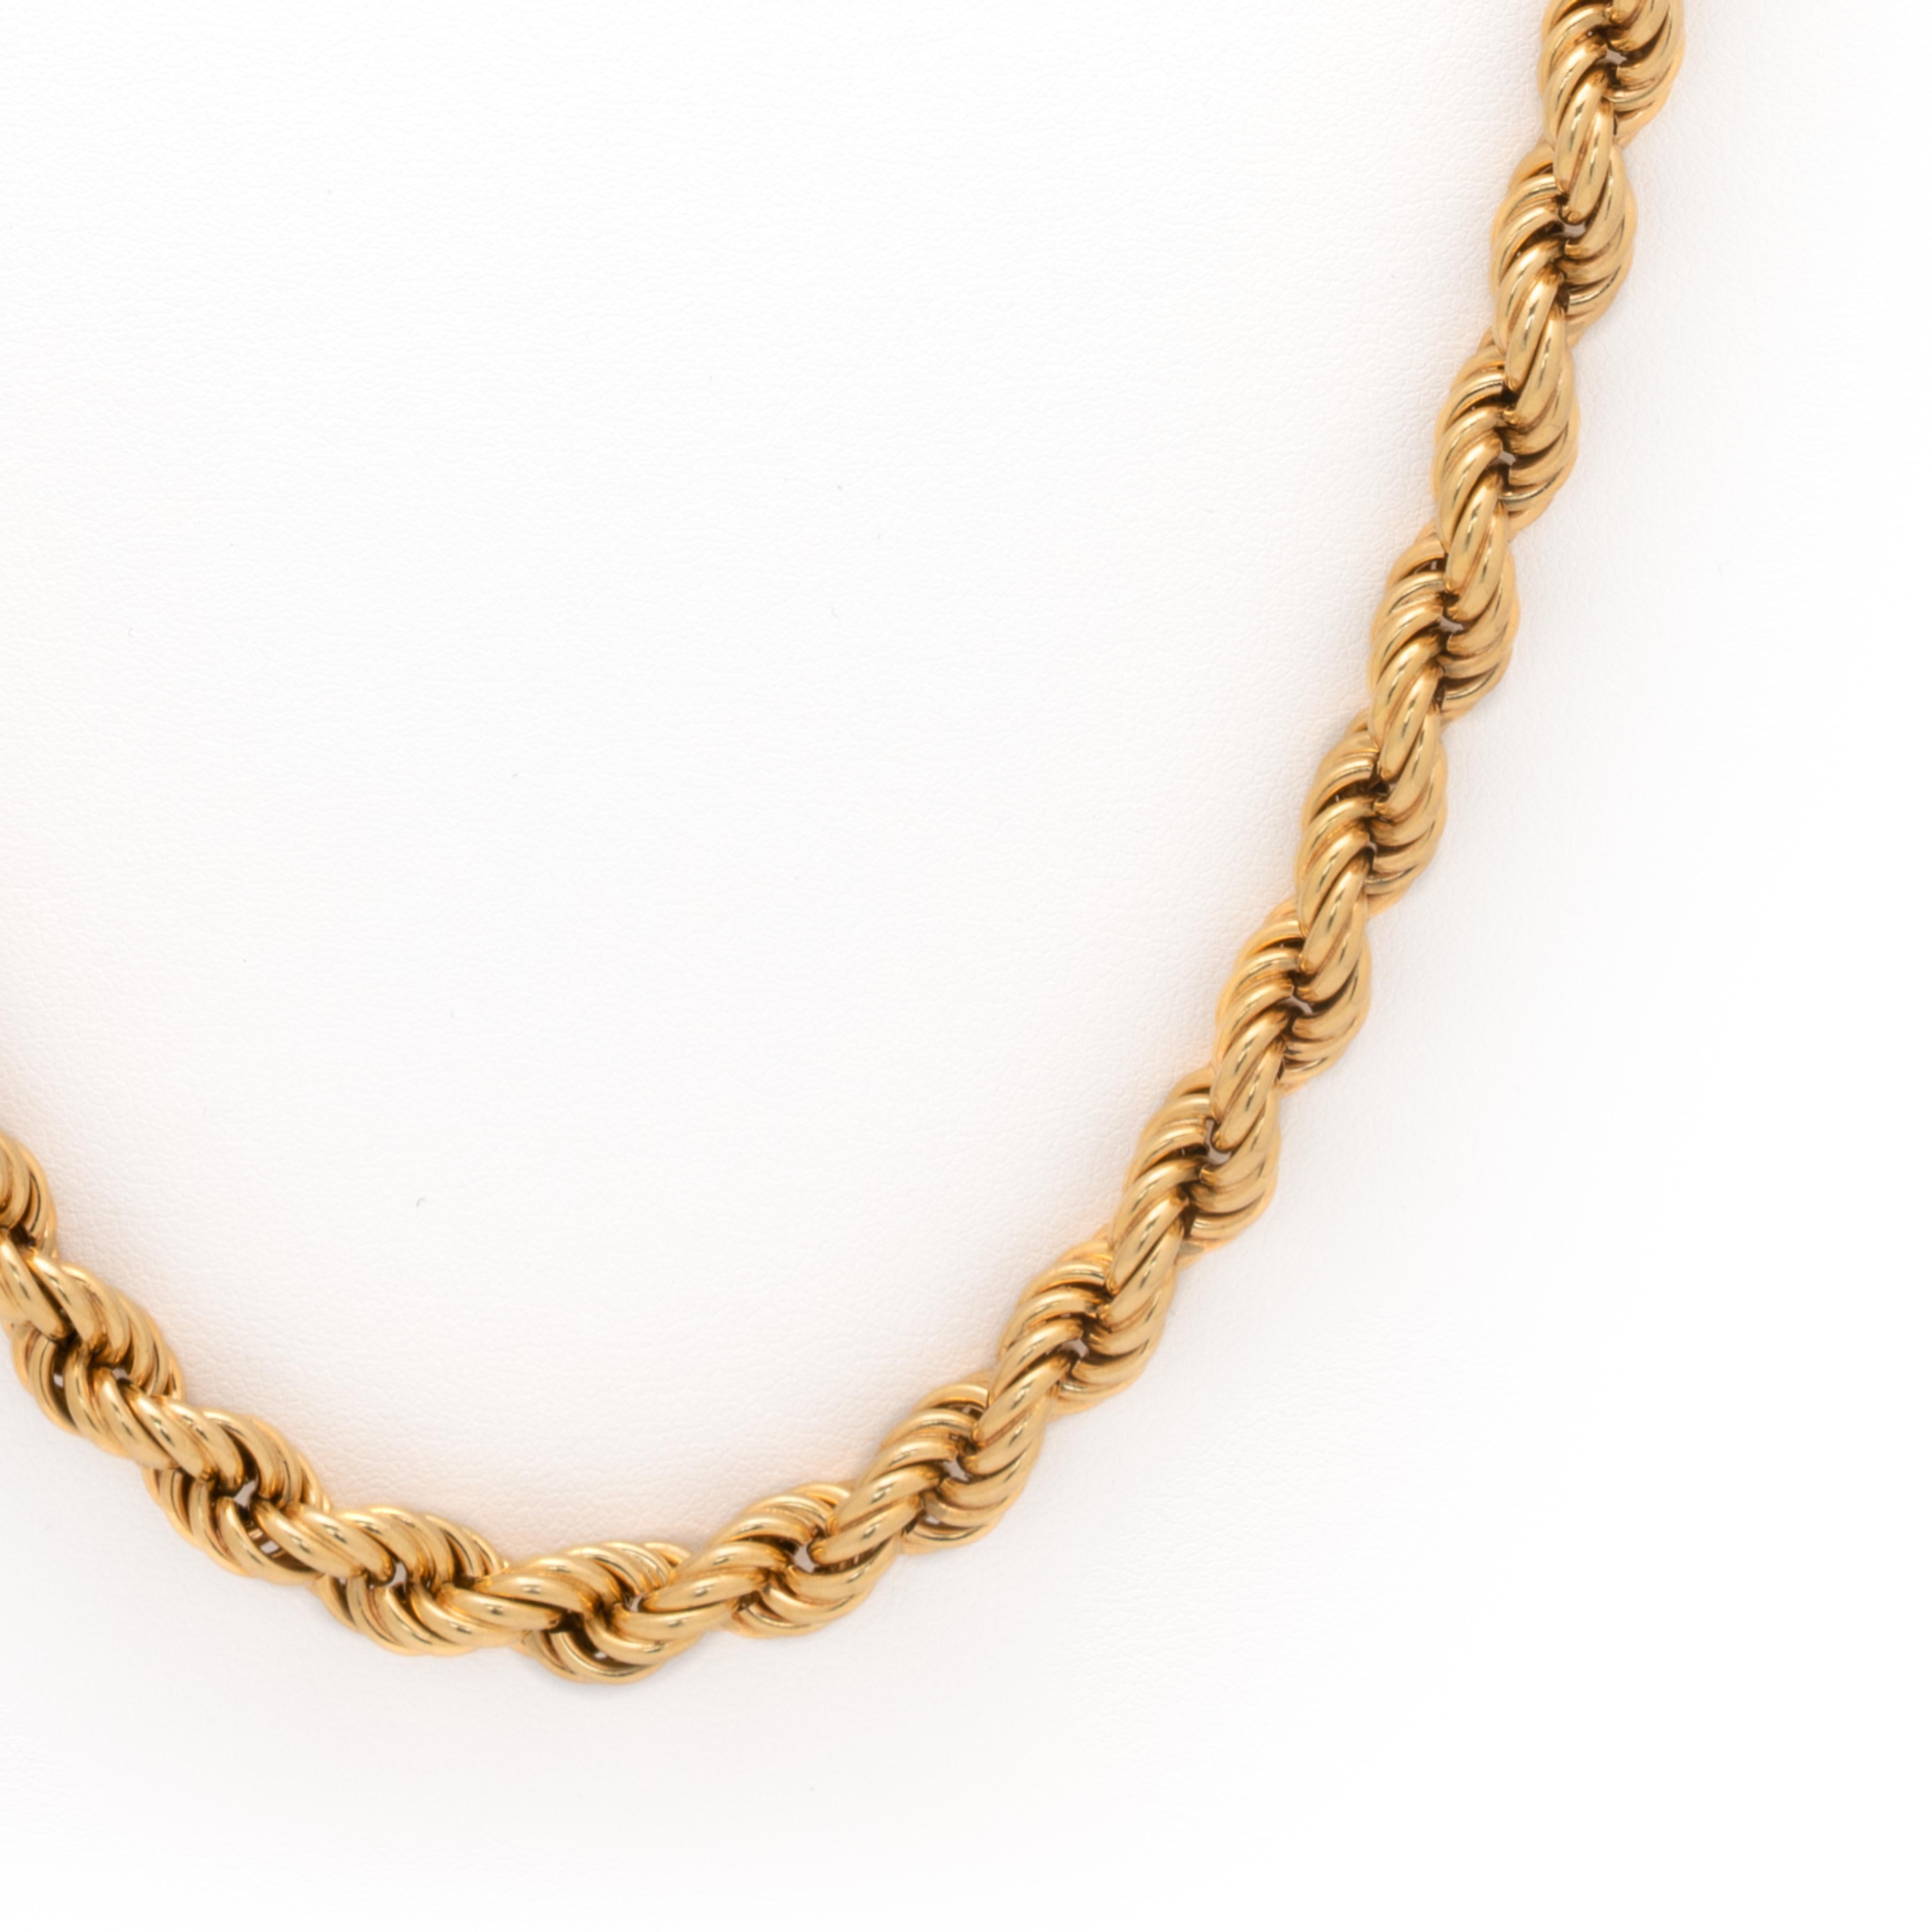 80s gold rope chain